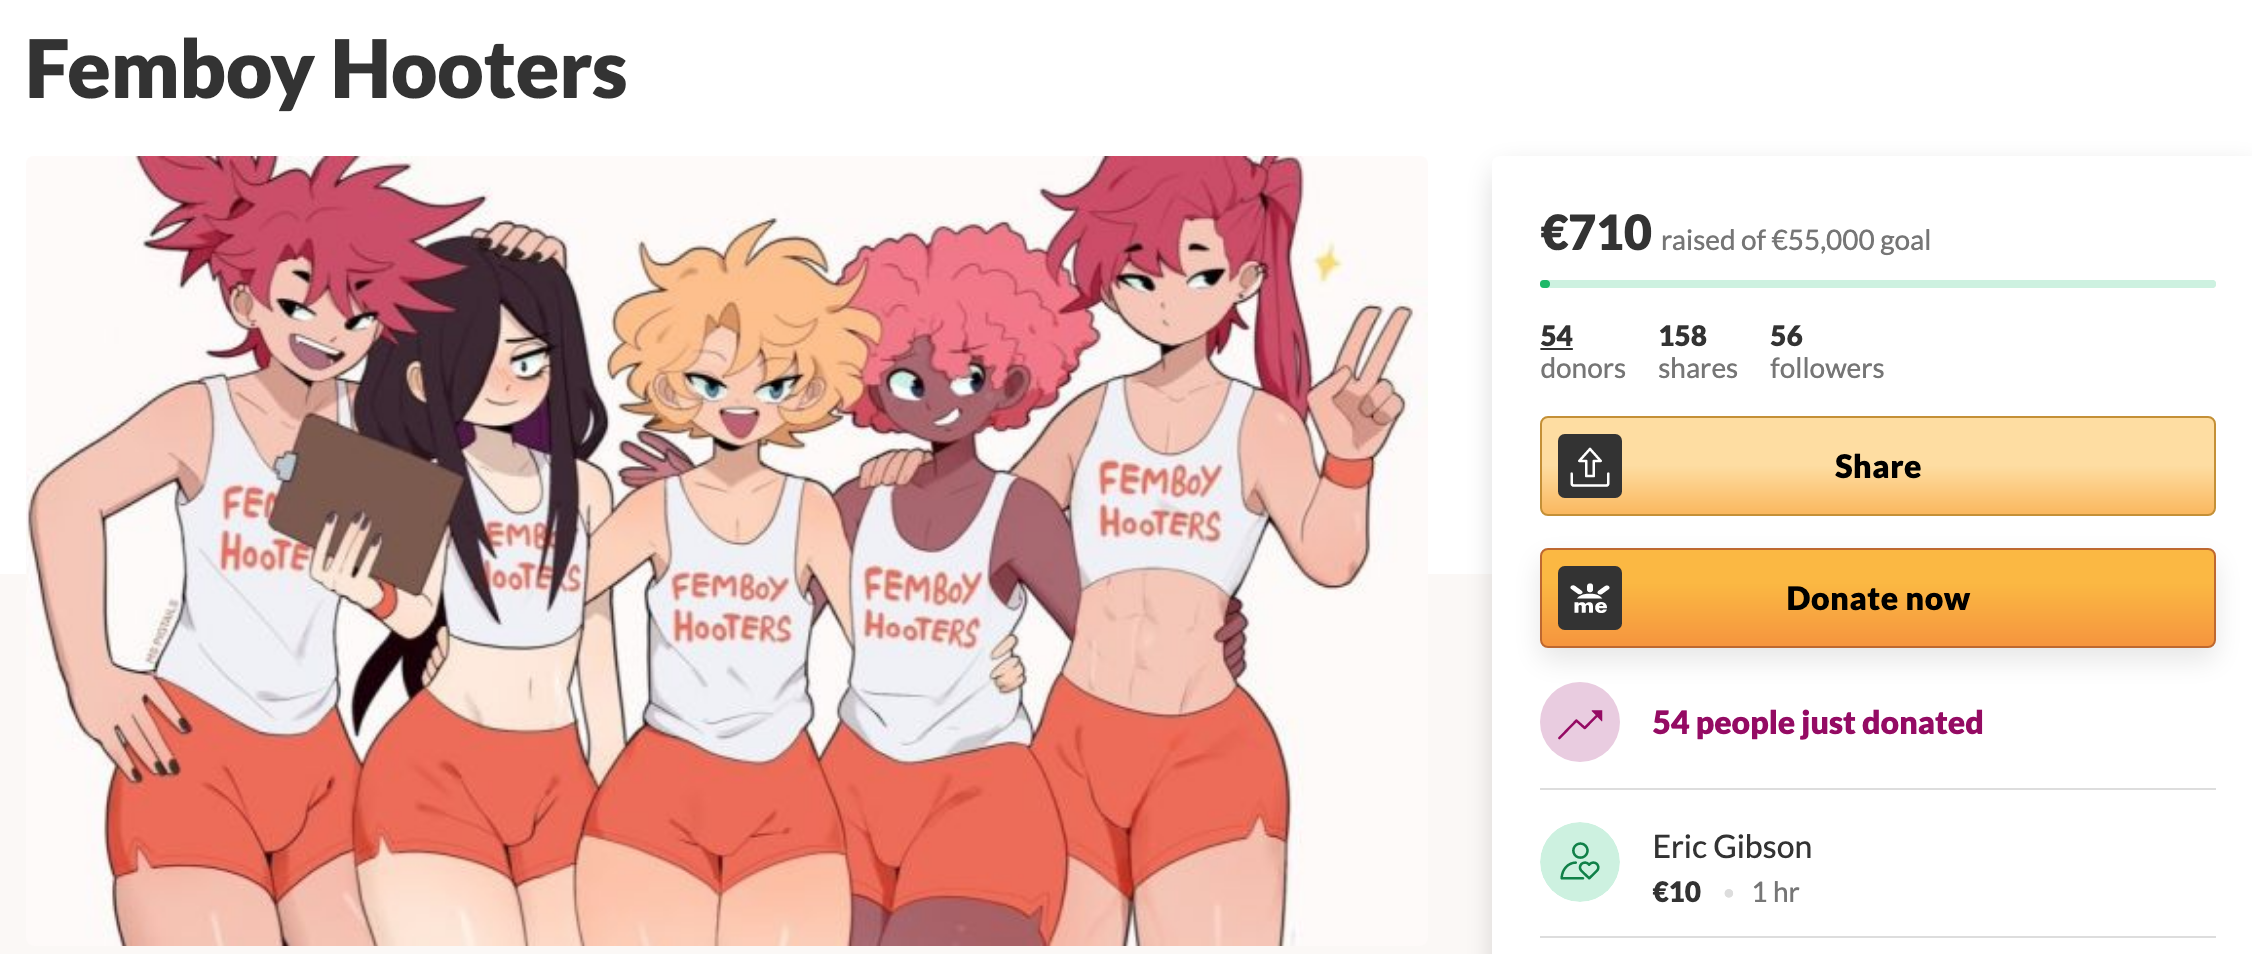 There's even a gofundme to make Femboy Hooters a real place.